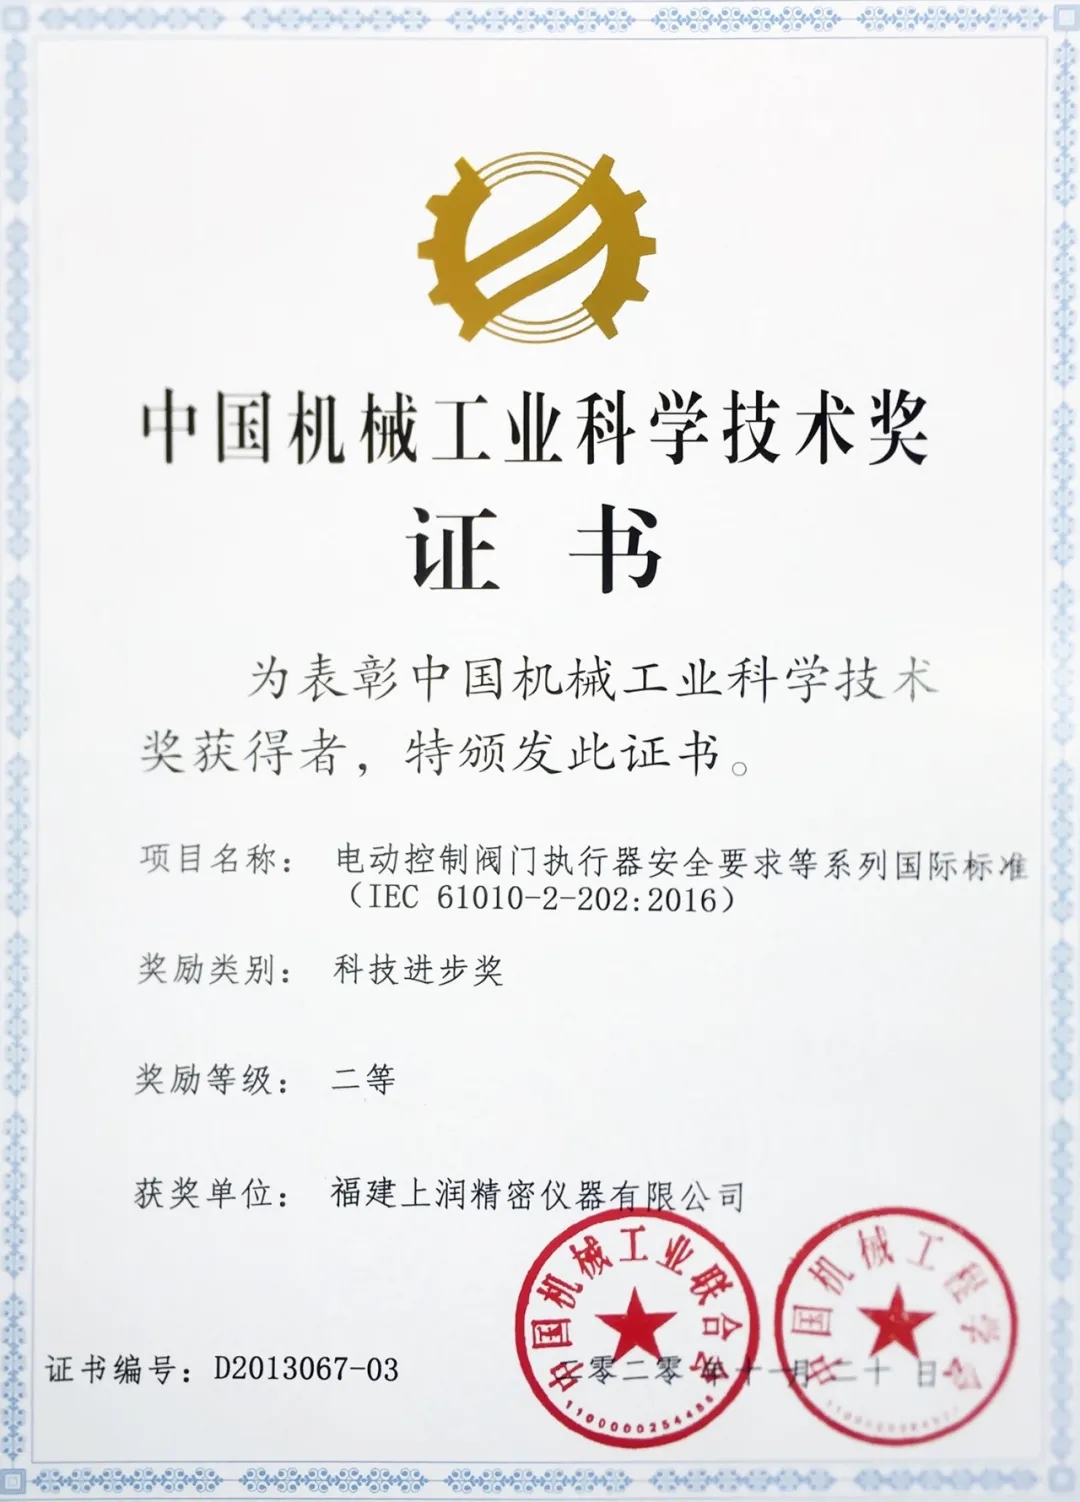 Top International Standard, Fujian WIDE PLUS won “China Machinery Industry Science and technology second prize”